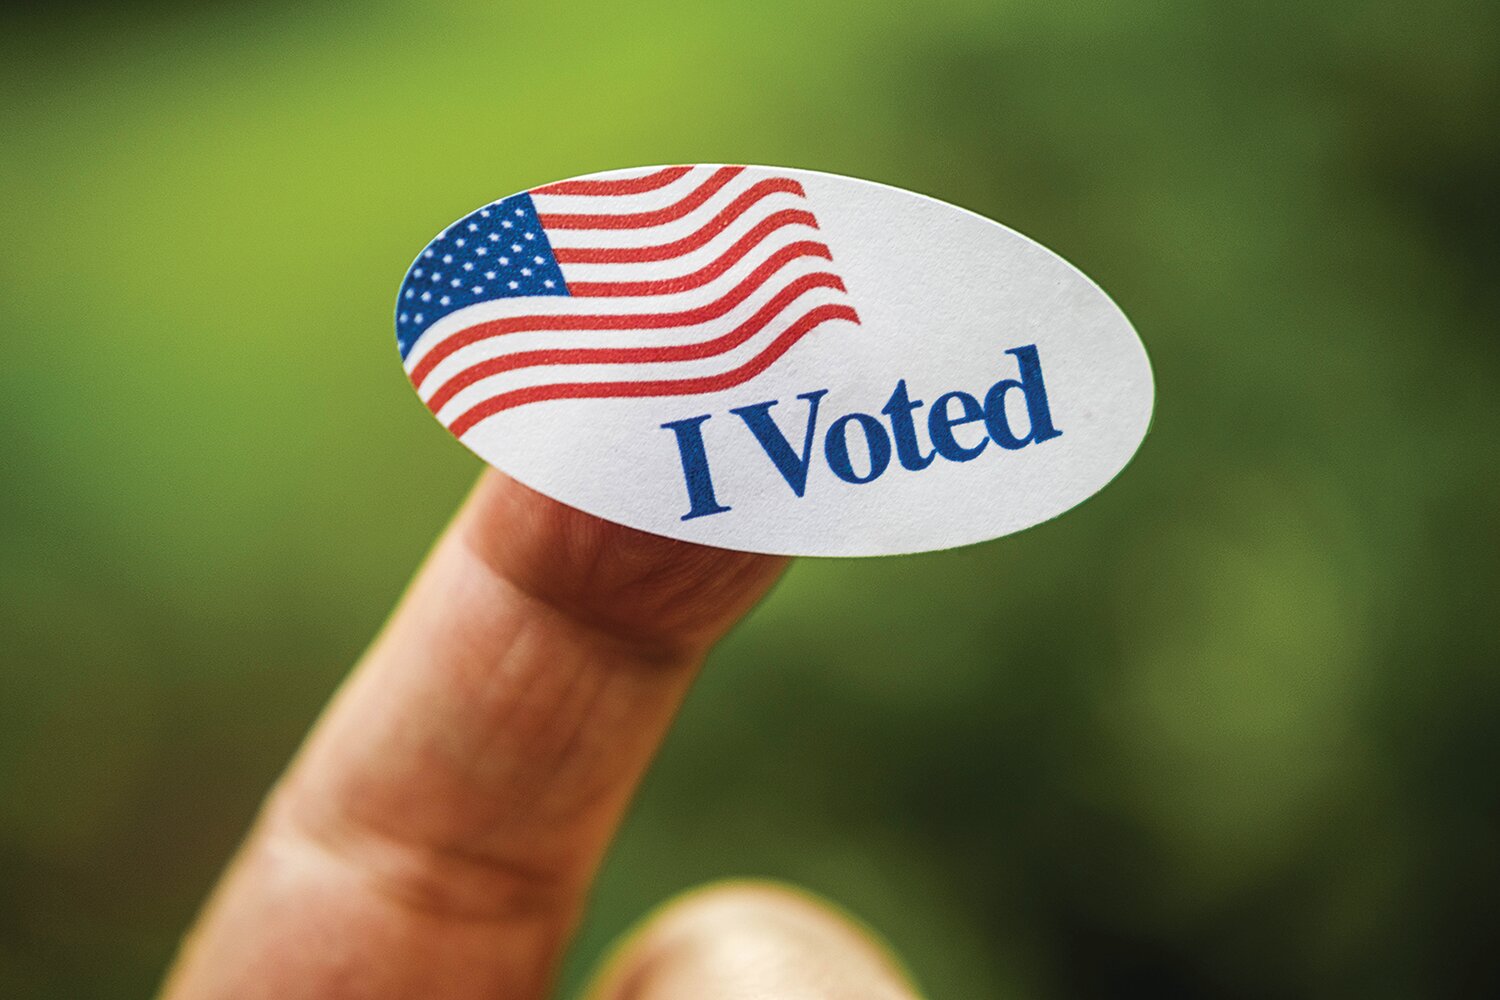 Submissions from local youth sought for Madison County ‘I Voted